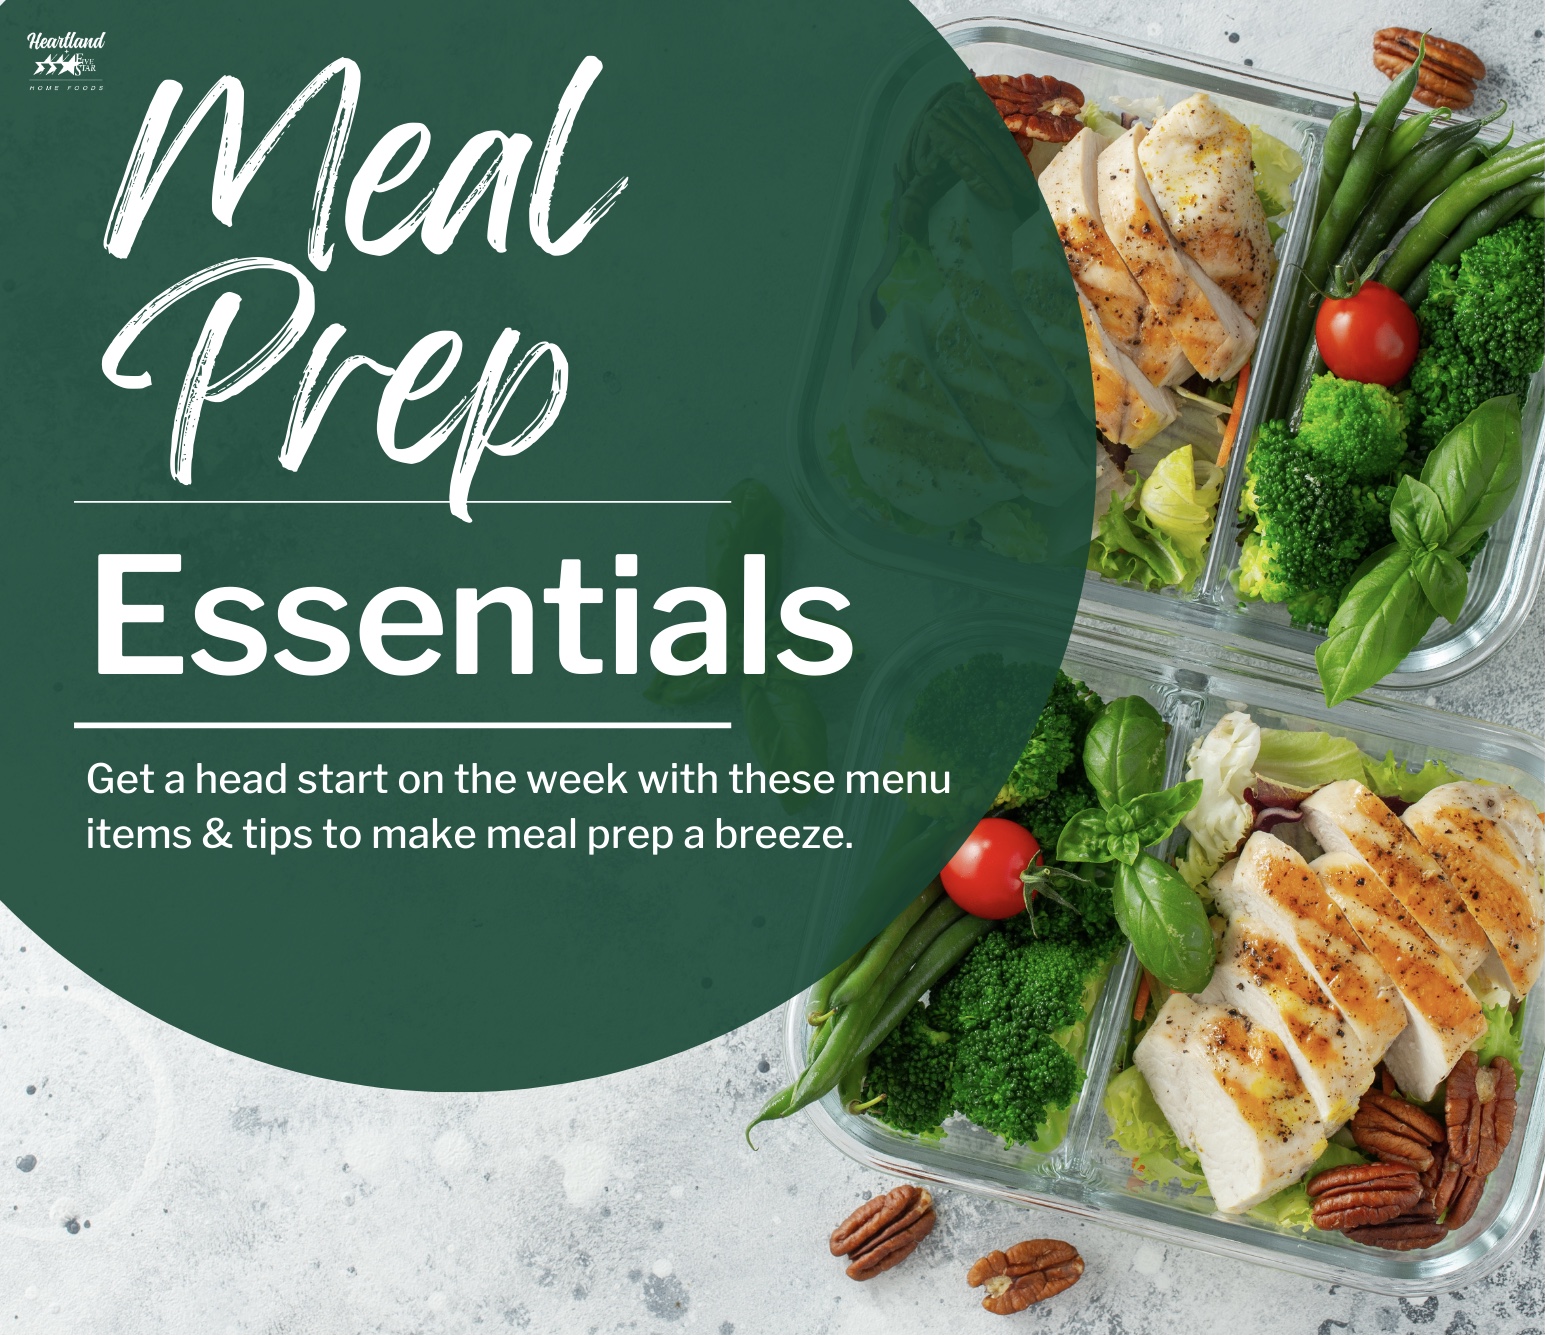 Save Money and Eat Well: Meal Prep Is The Way to Go! – Five Star Home Foods  Blog